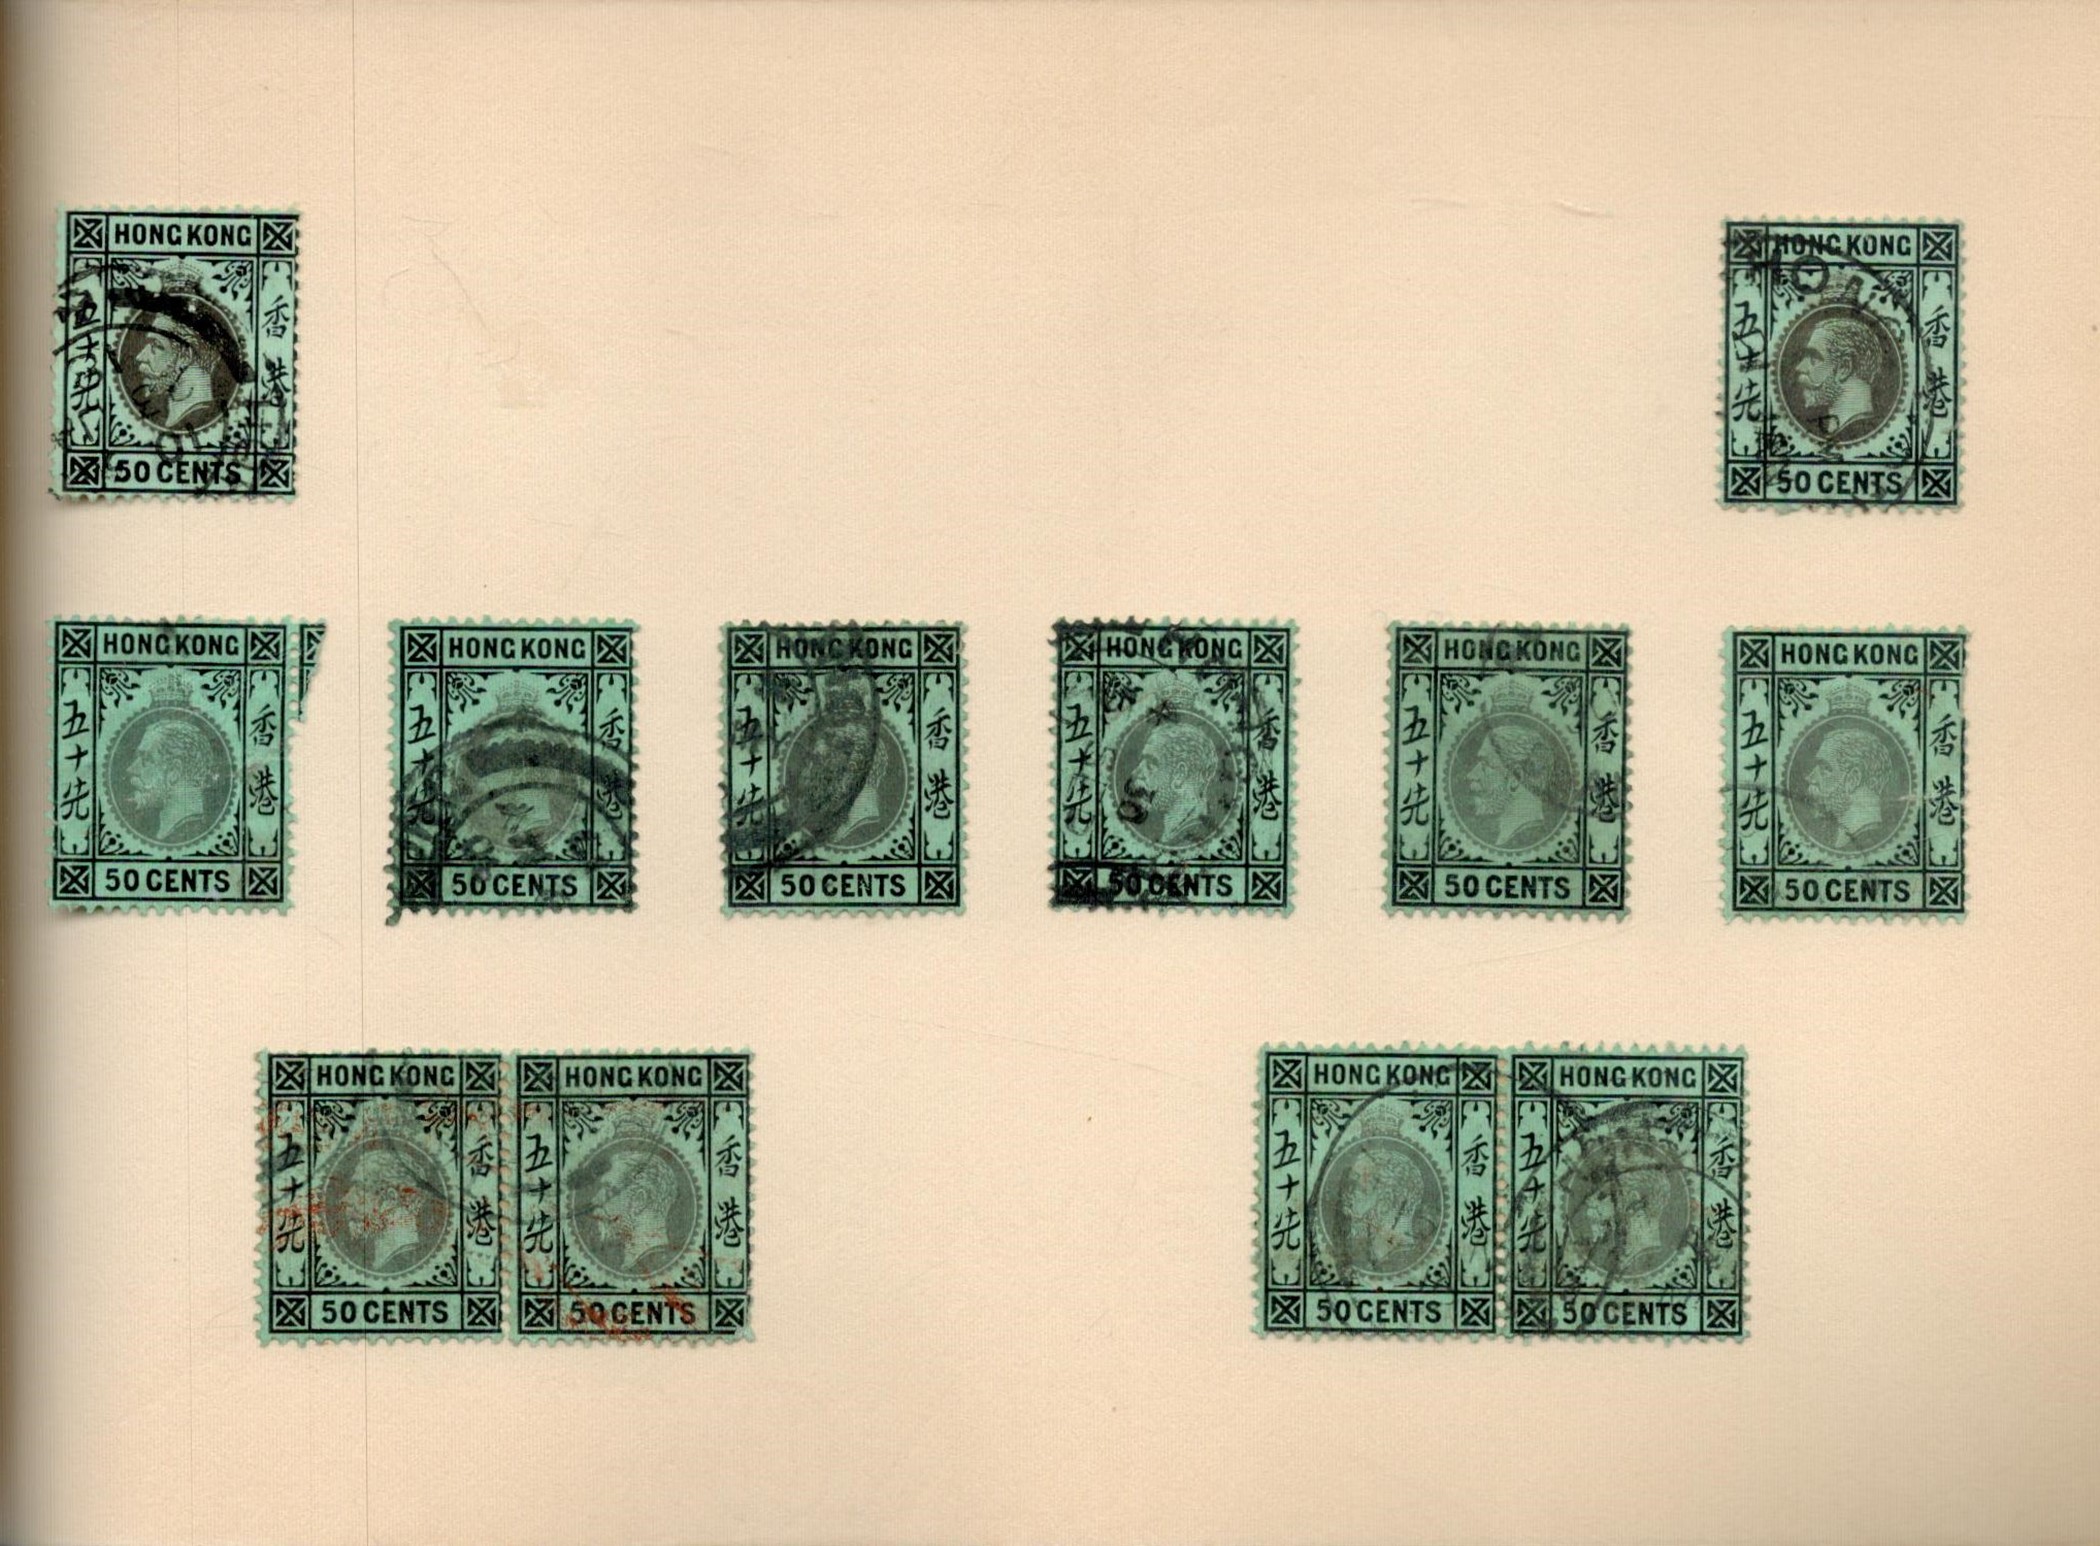 Worldwide Stamps in a Twinlock Crown Loose Leaf Binder countries include India, China, Gold Coast, - Image 4 of 4